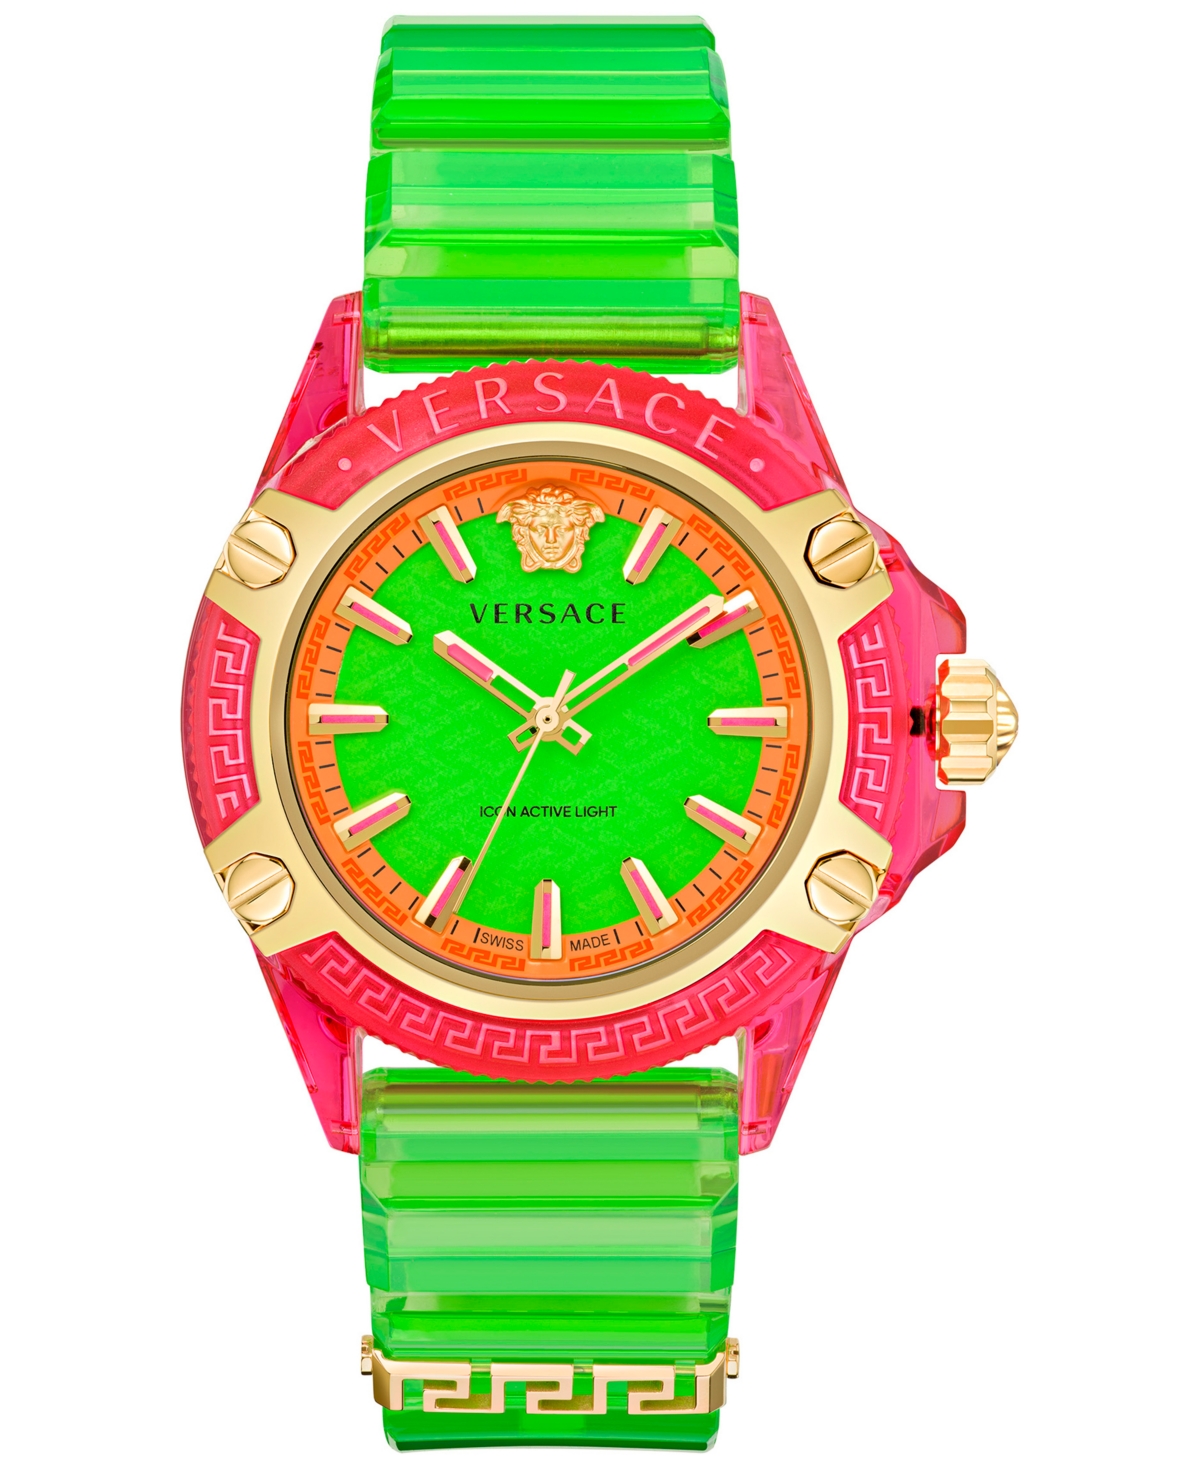 VERSACE MEN'S SWISS ICON ACTIVE GREEN SILICONE STRAP WATCH 42MM